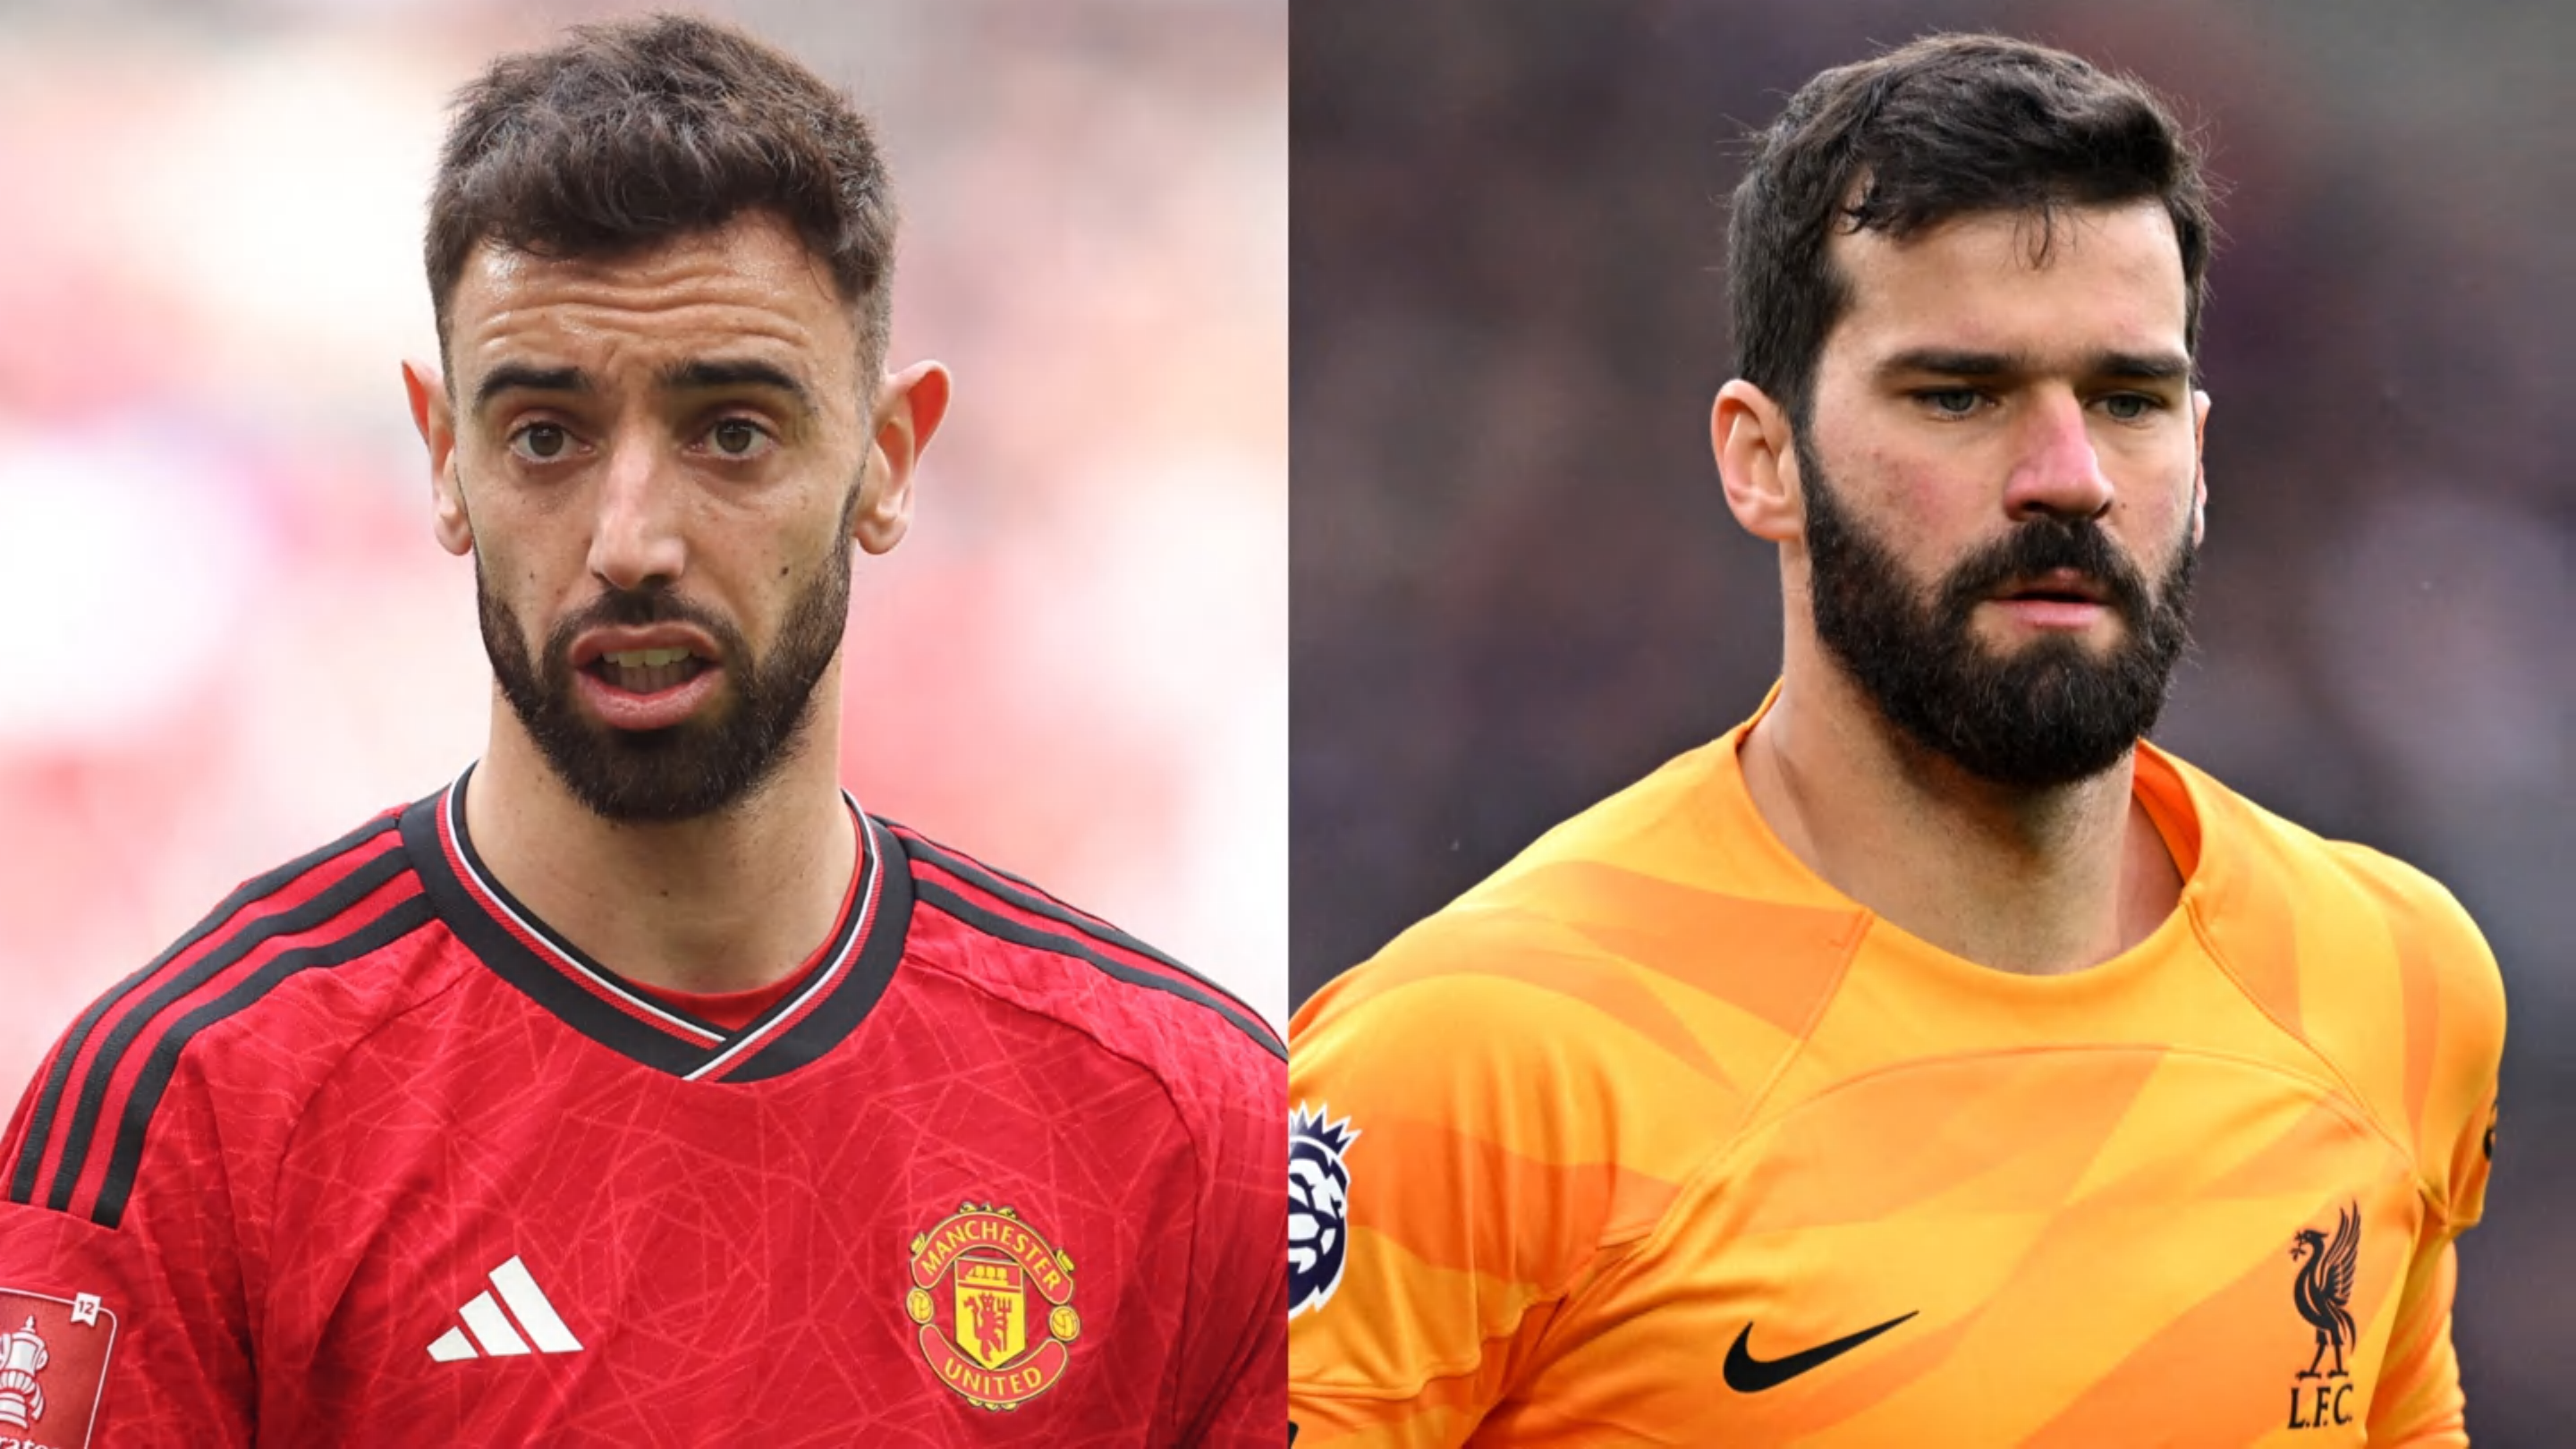 Football transfer rumours: Man Utd to receive £128m Fernandes offer; Alisson considers Liverpool exit